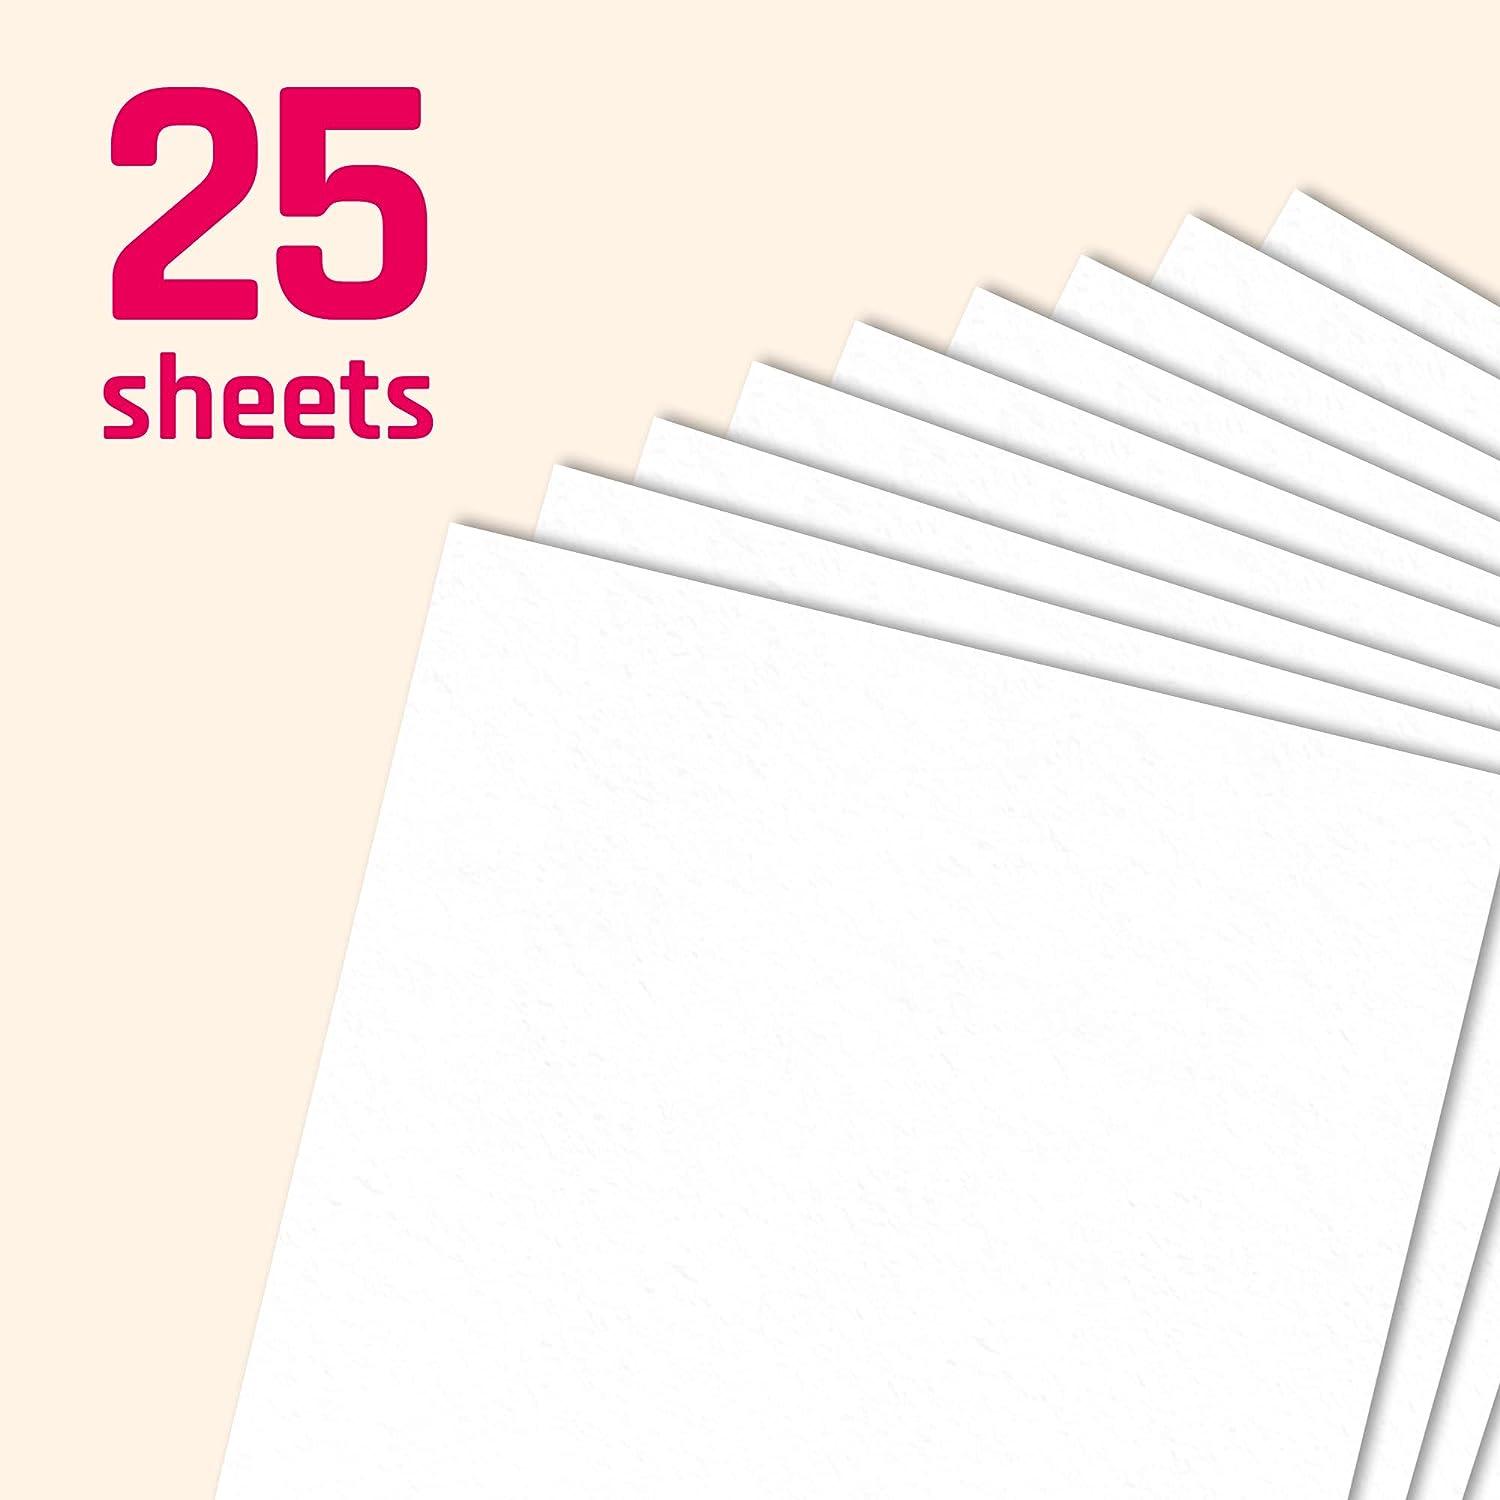 25 Sheets White Cardstock Paper Heavyweight - 110 lb. Cover 12 x